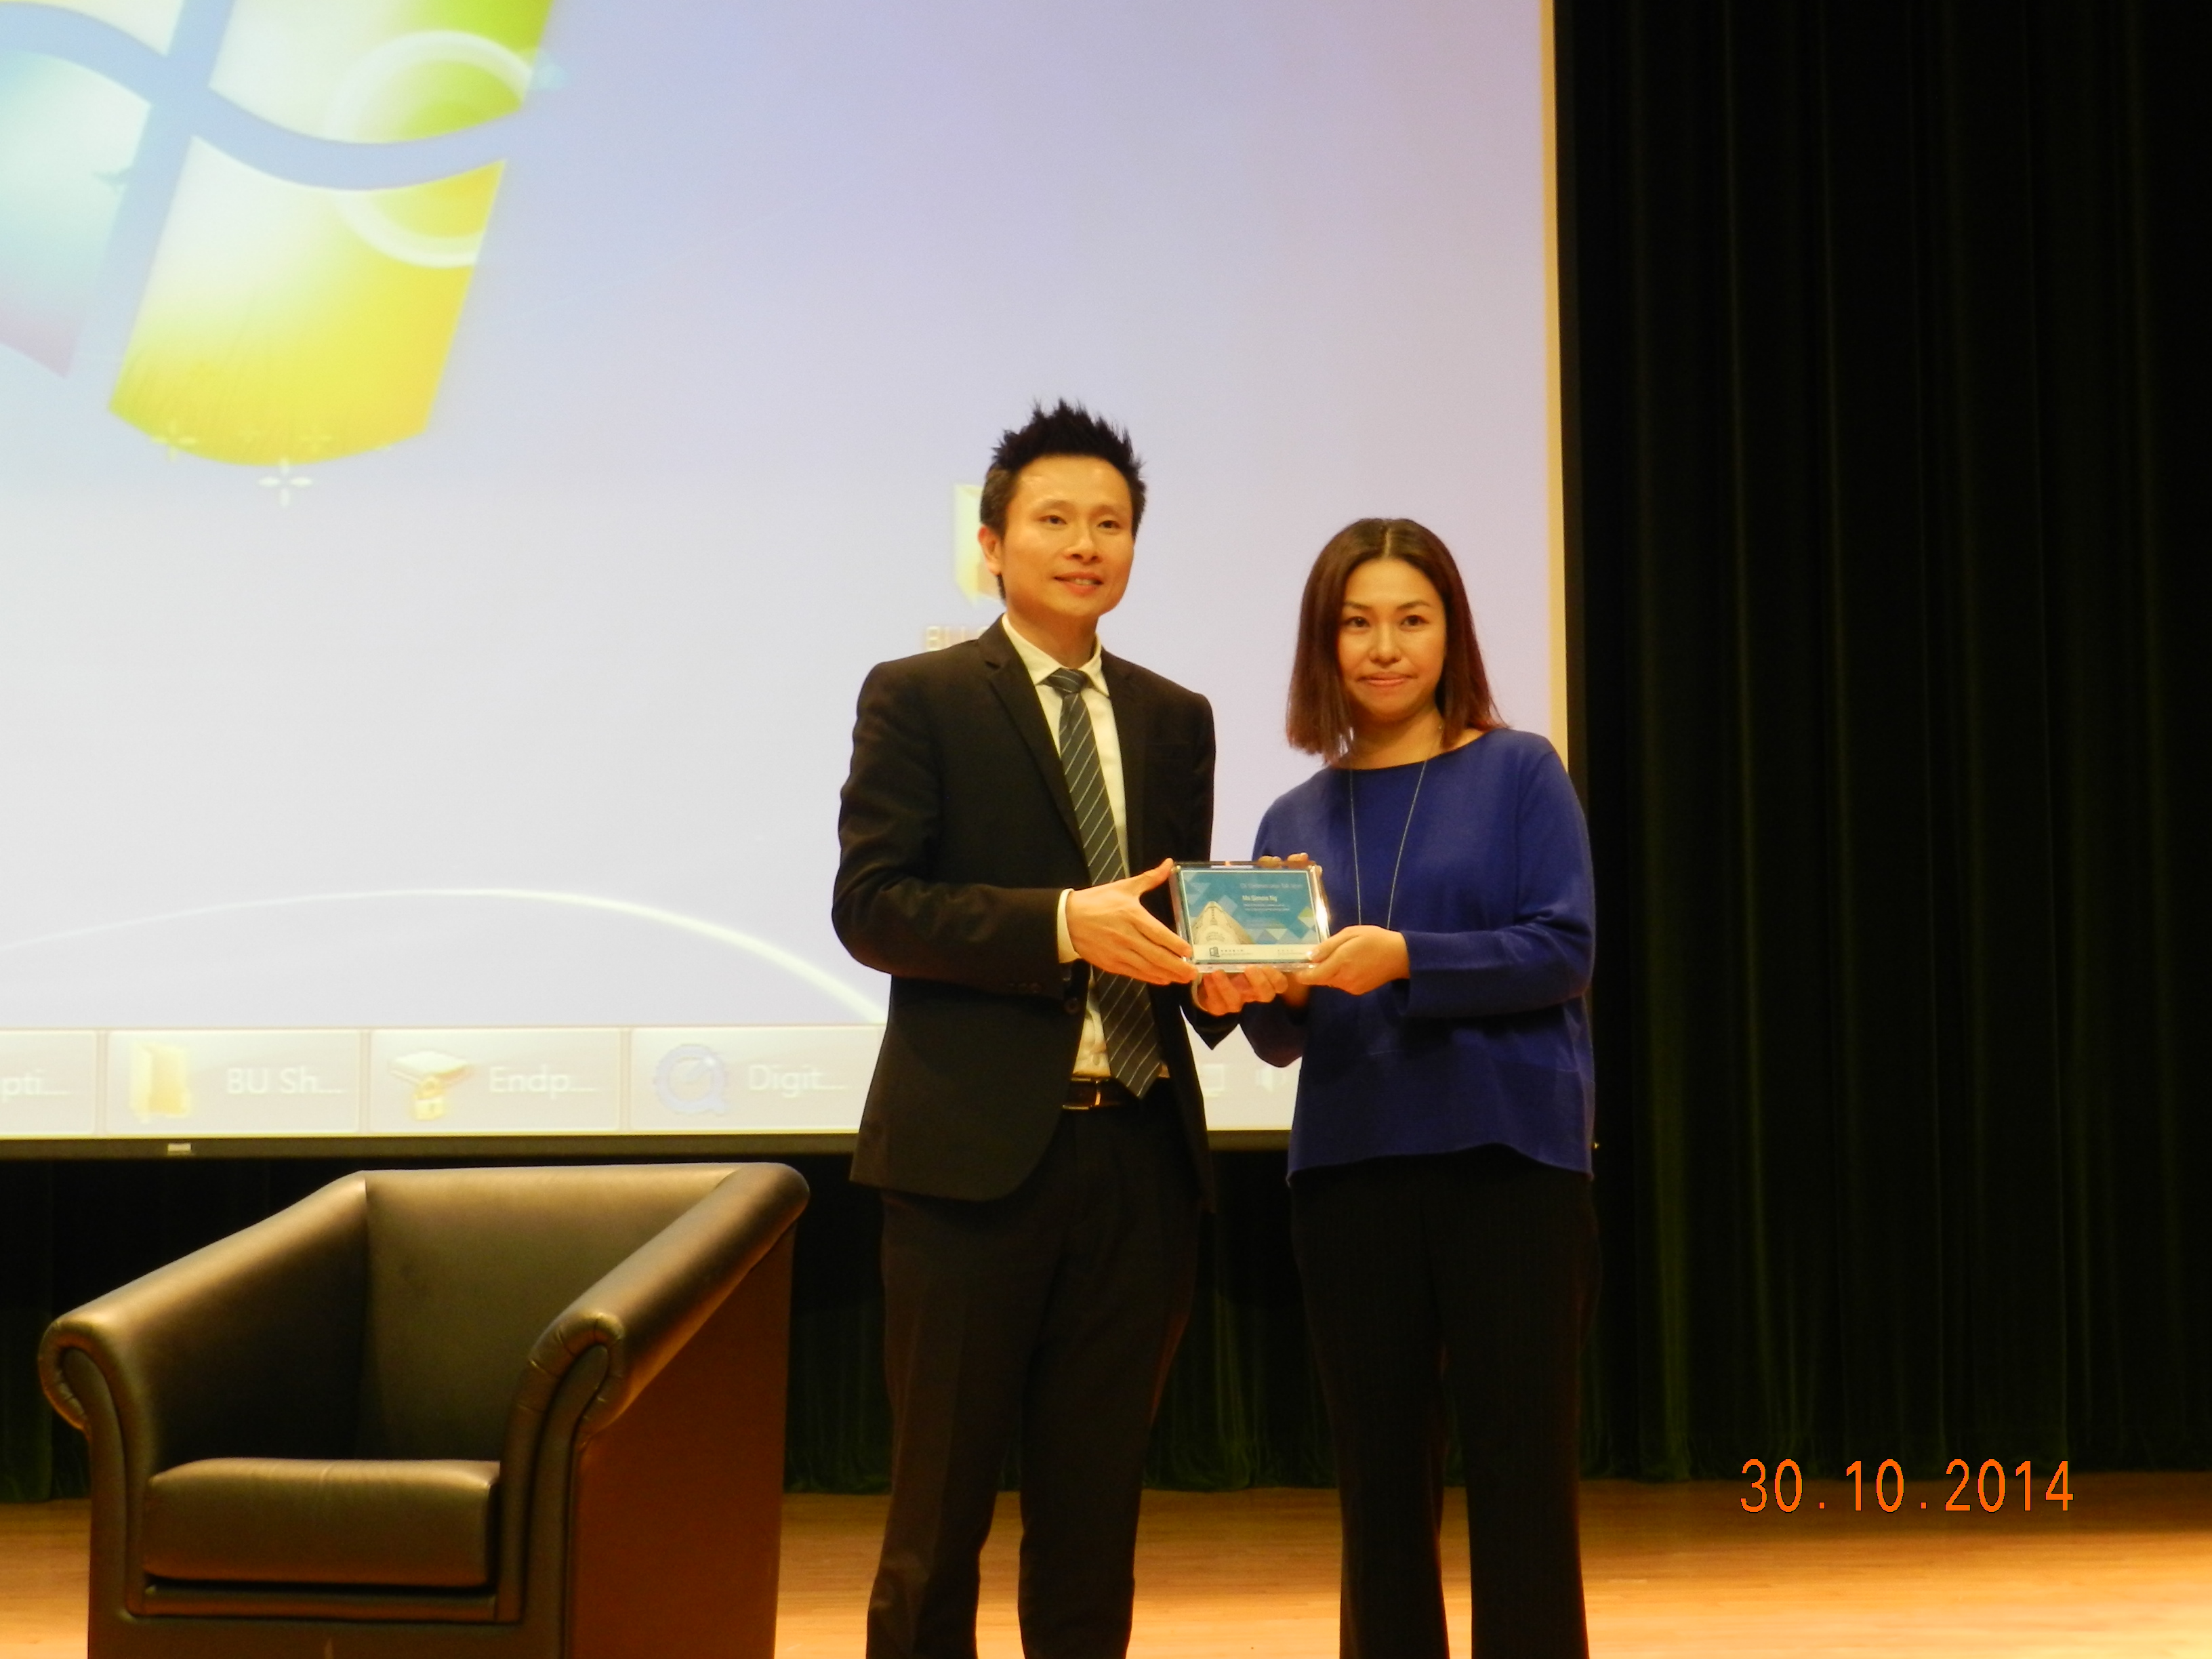 Ms. Simois Ng, Head of Marketing Communications of Sony Hong Kong (on the right) and Dr. Sam Lau, Director of CIE.